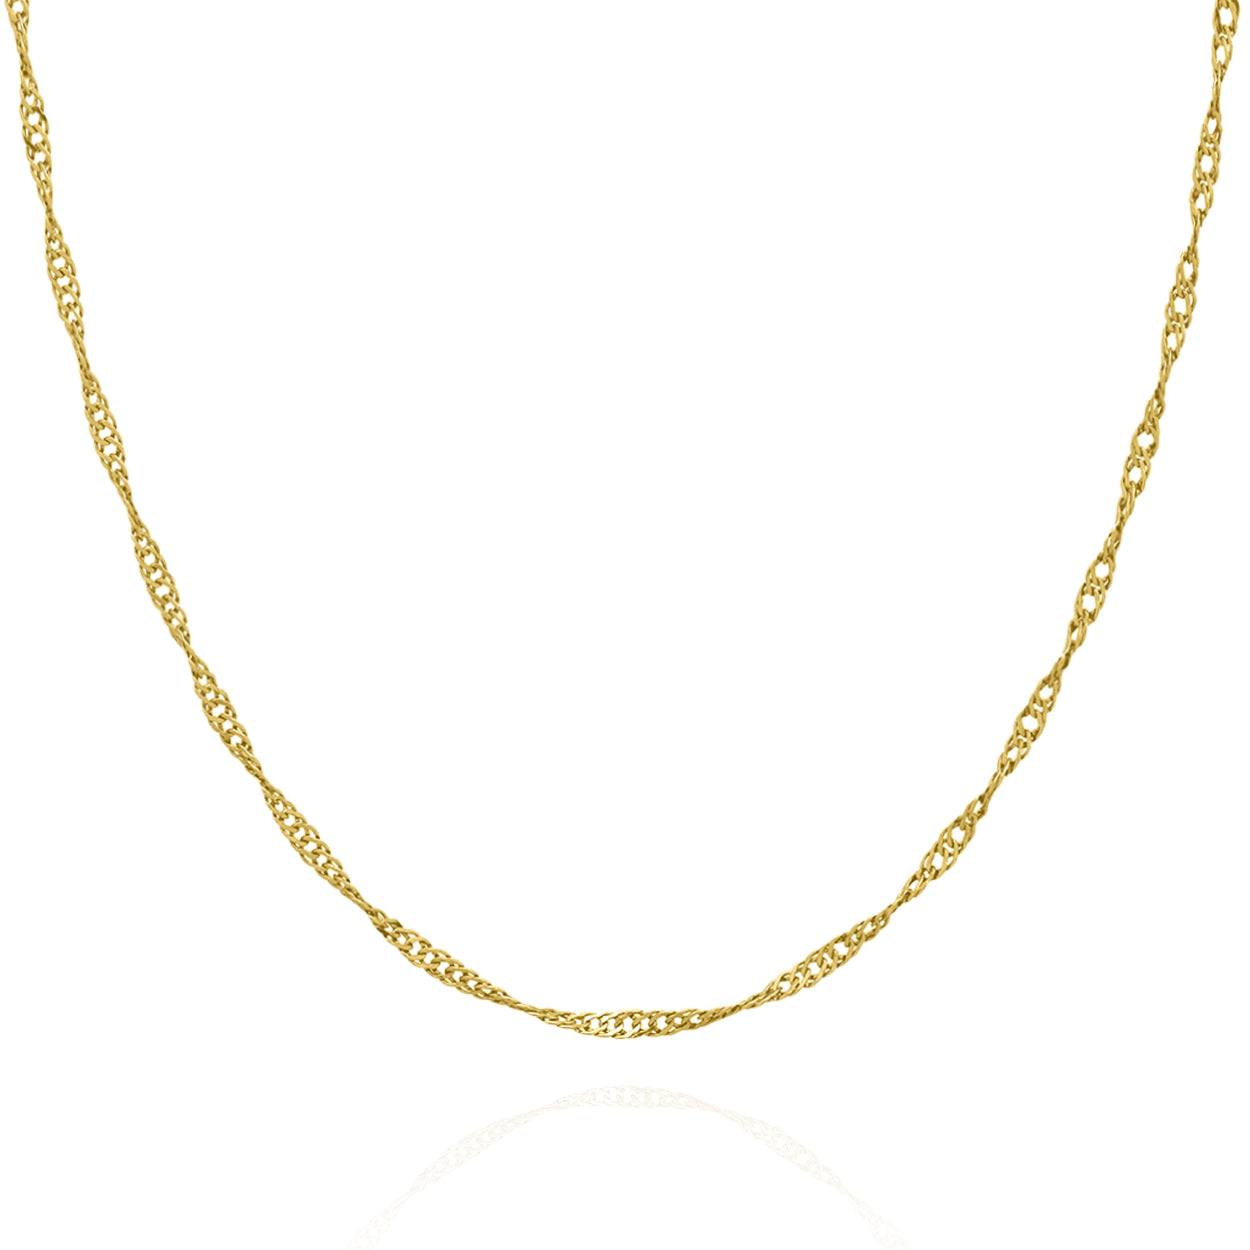 1.7mm Wide Singapore Style Chain Solid Gold Yellow